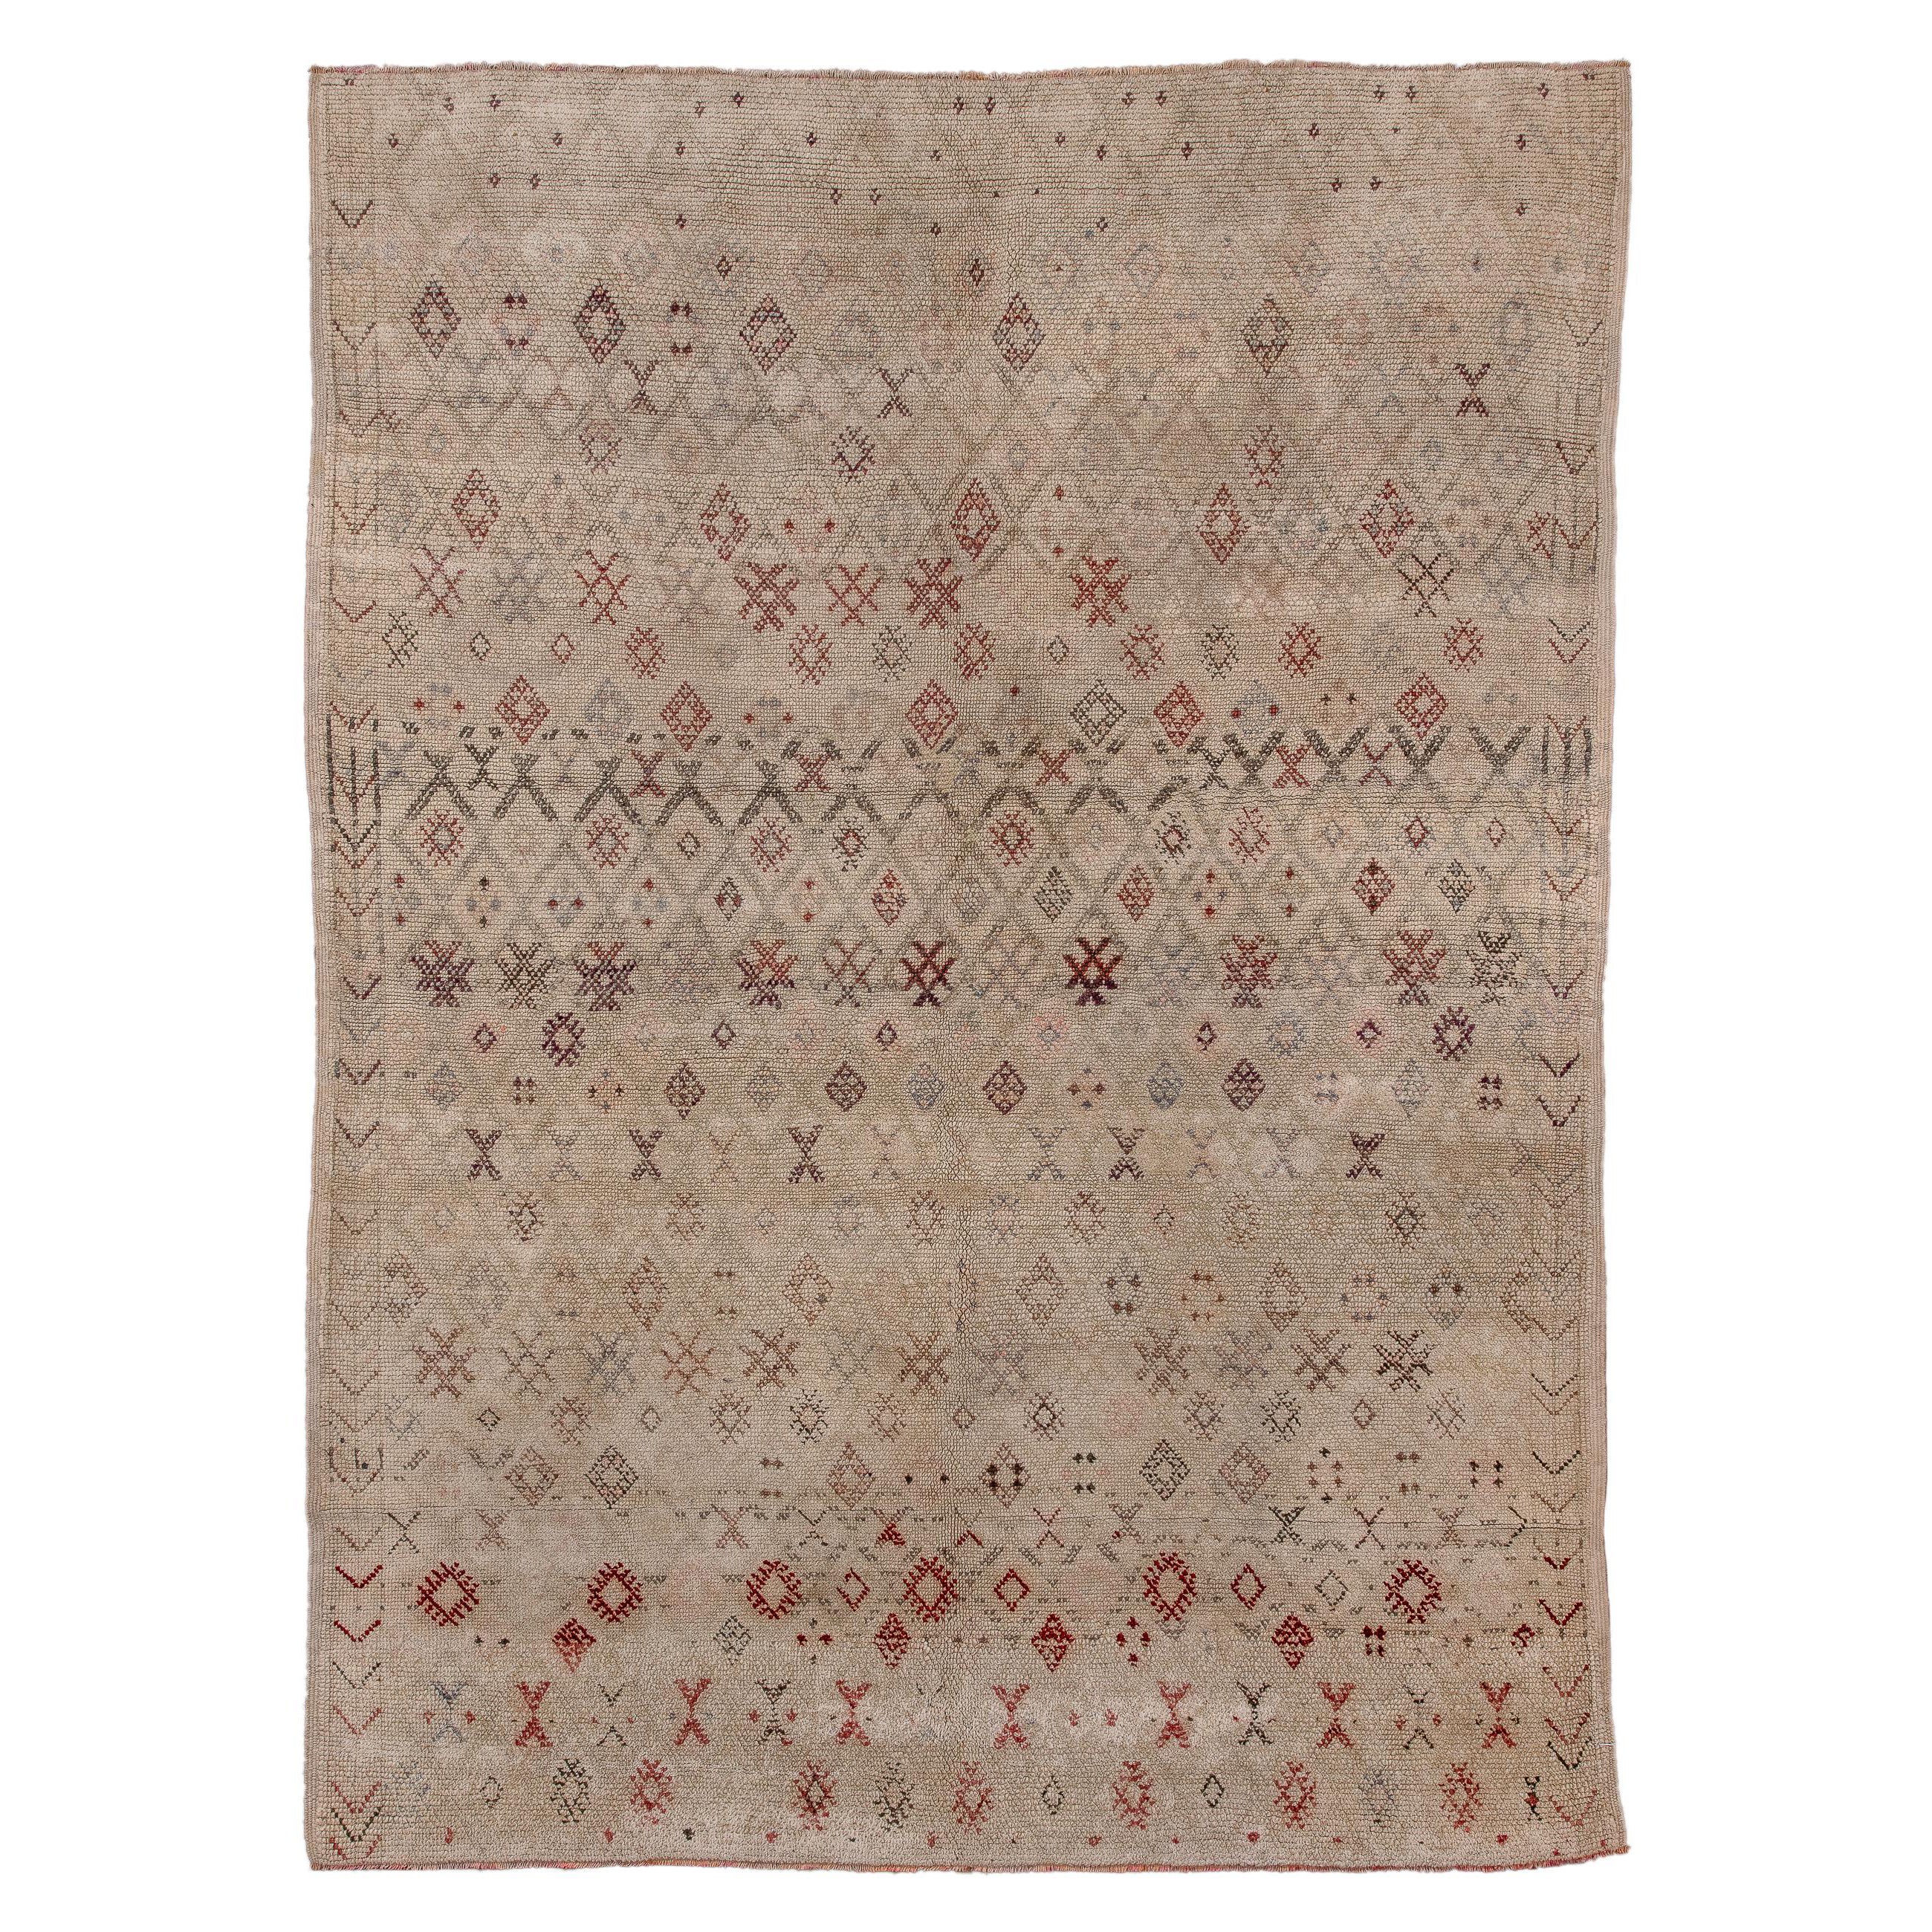 Rustic Moroccan Rug with Tan Field 